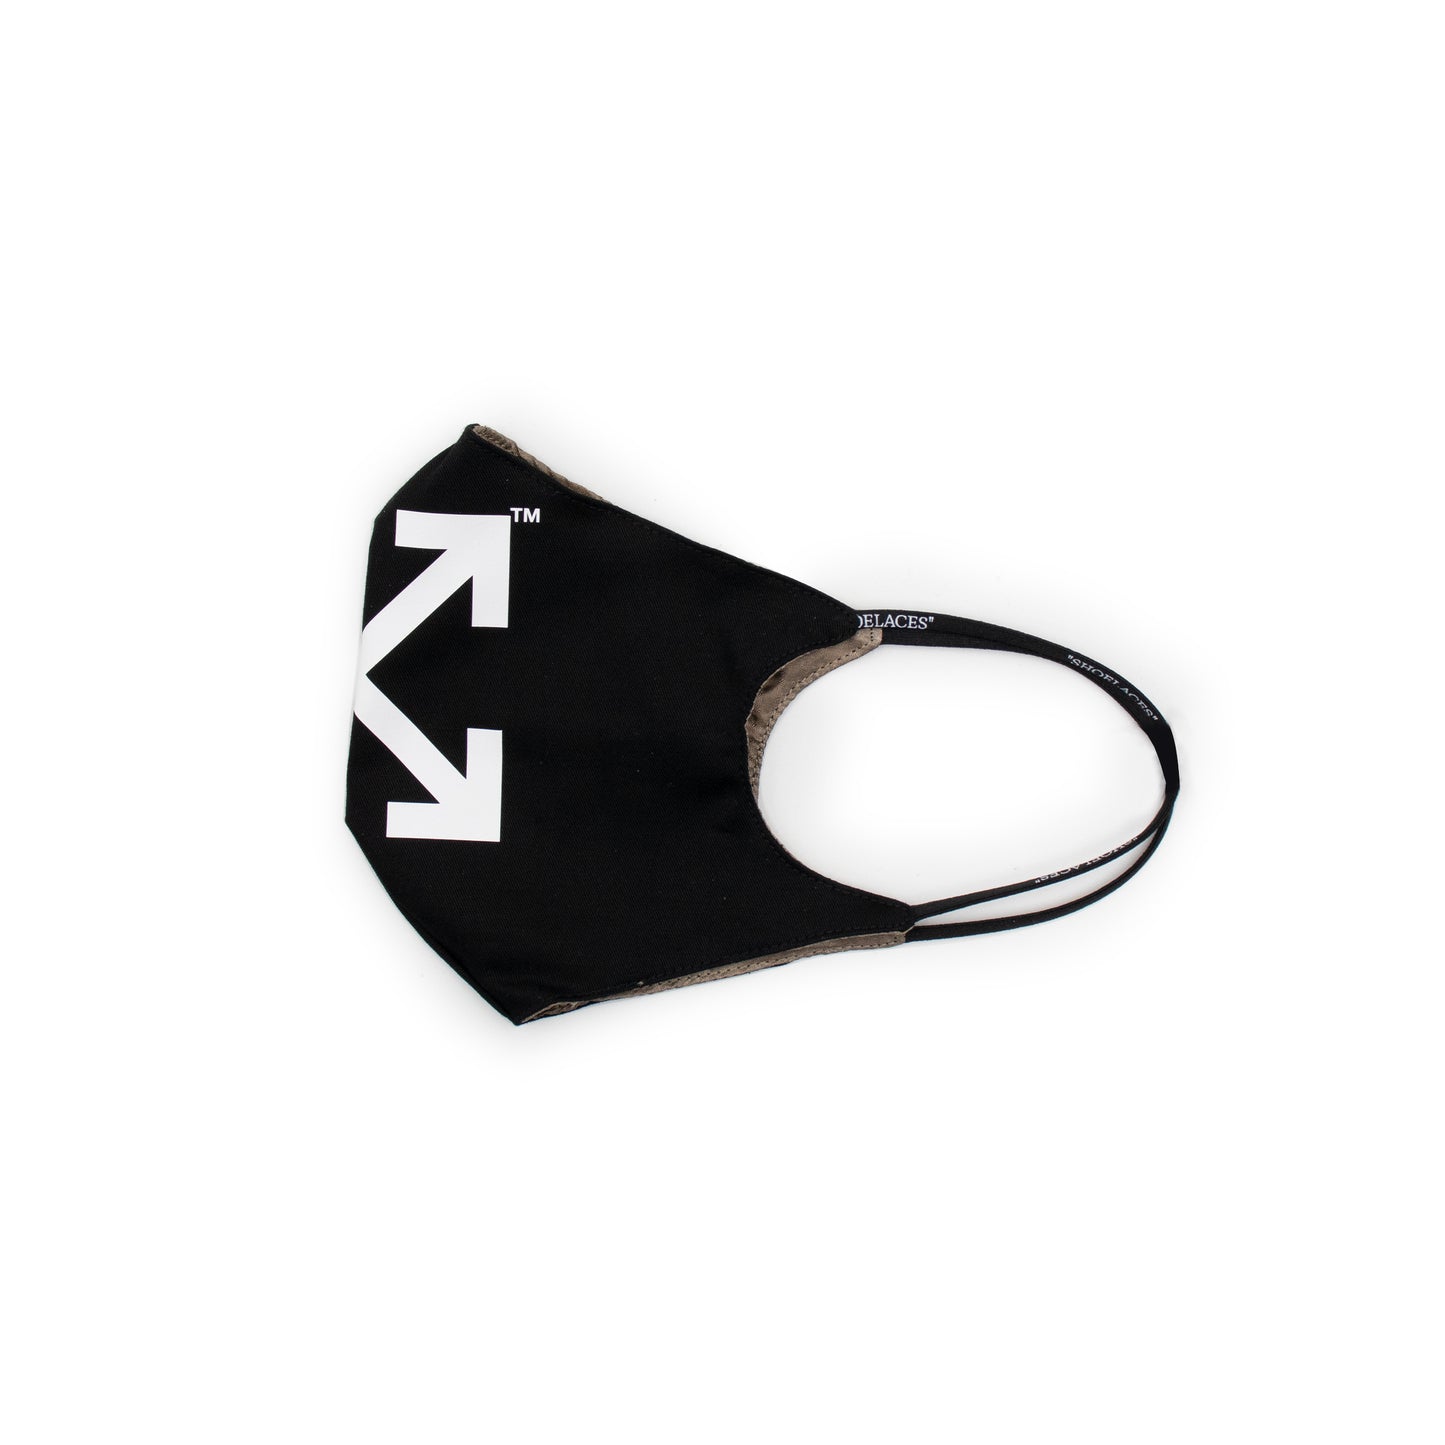 Classic Arrow Simple Mask in Black